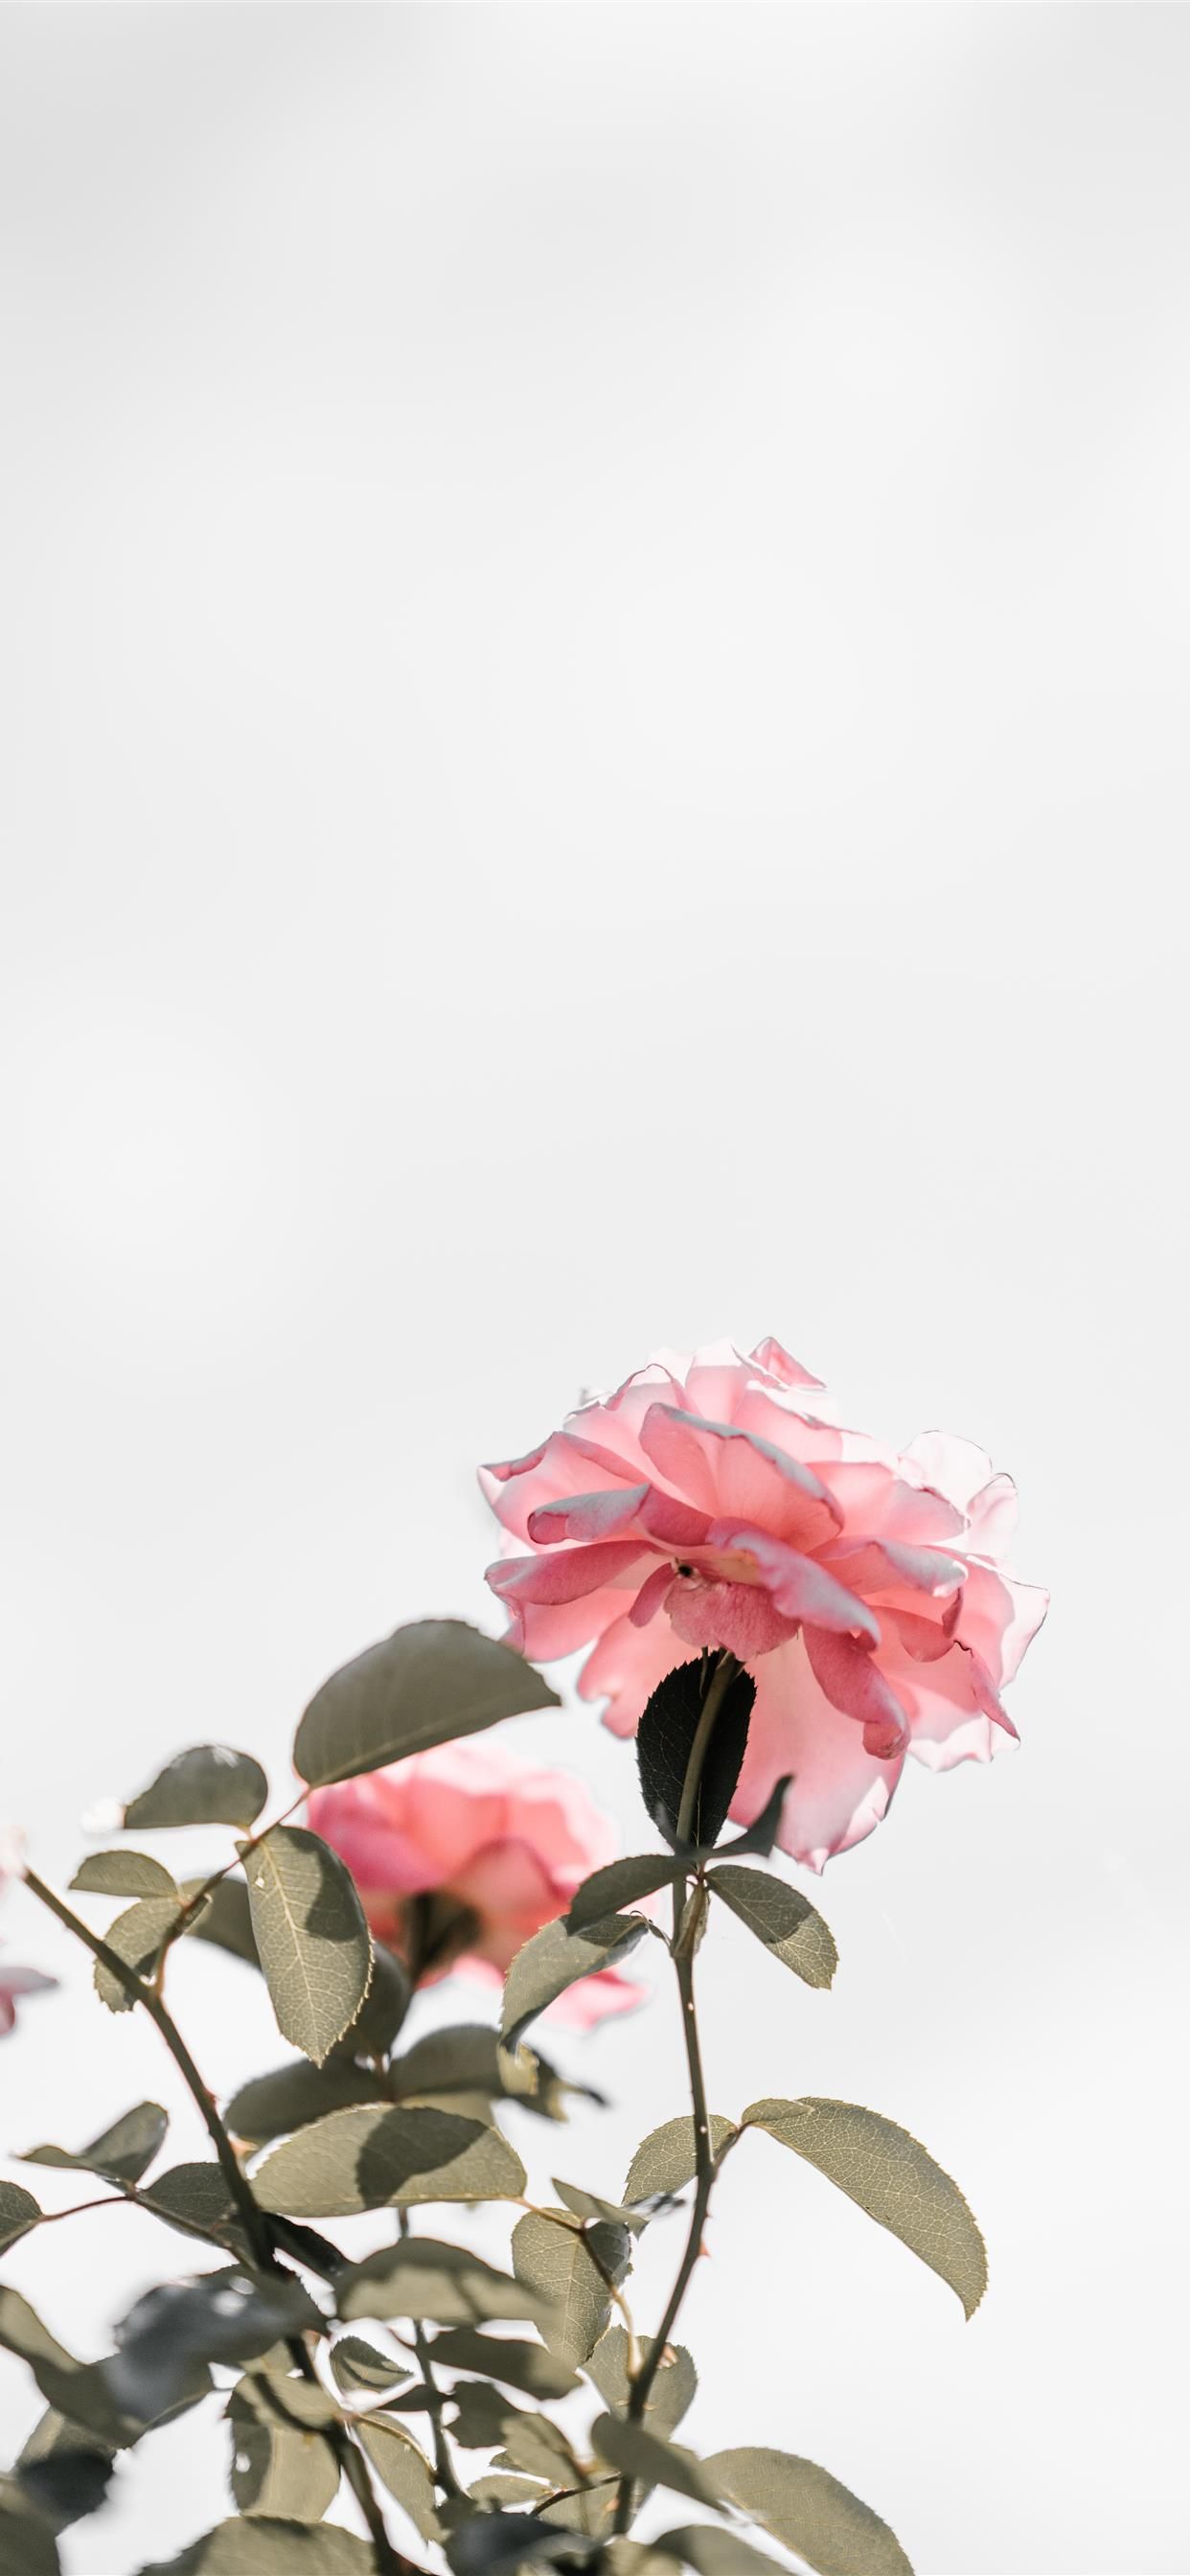 Pink roses with blank space light iPhone X Wallpaper Free Download